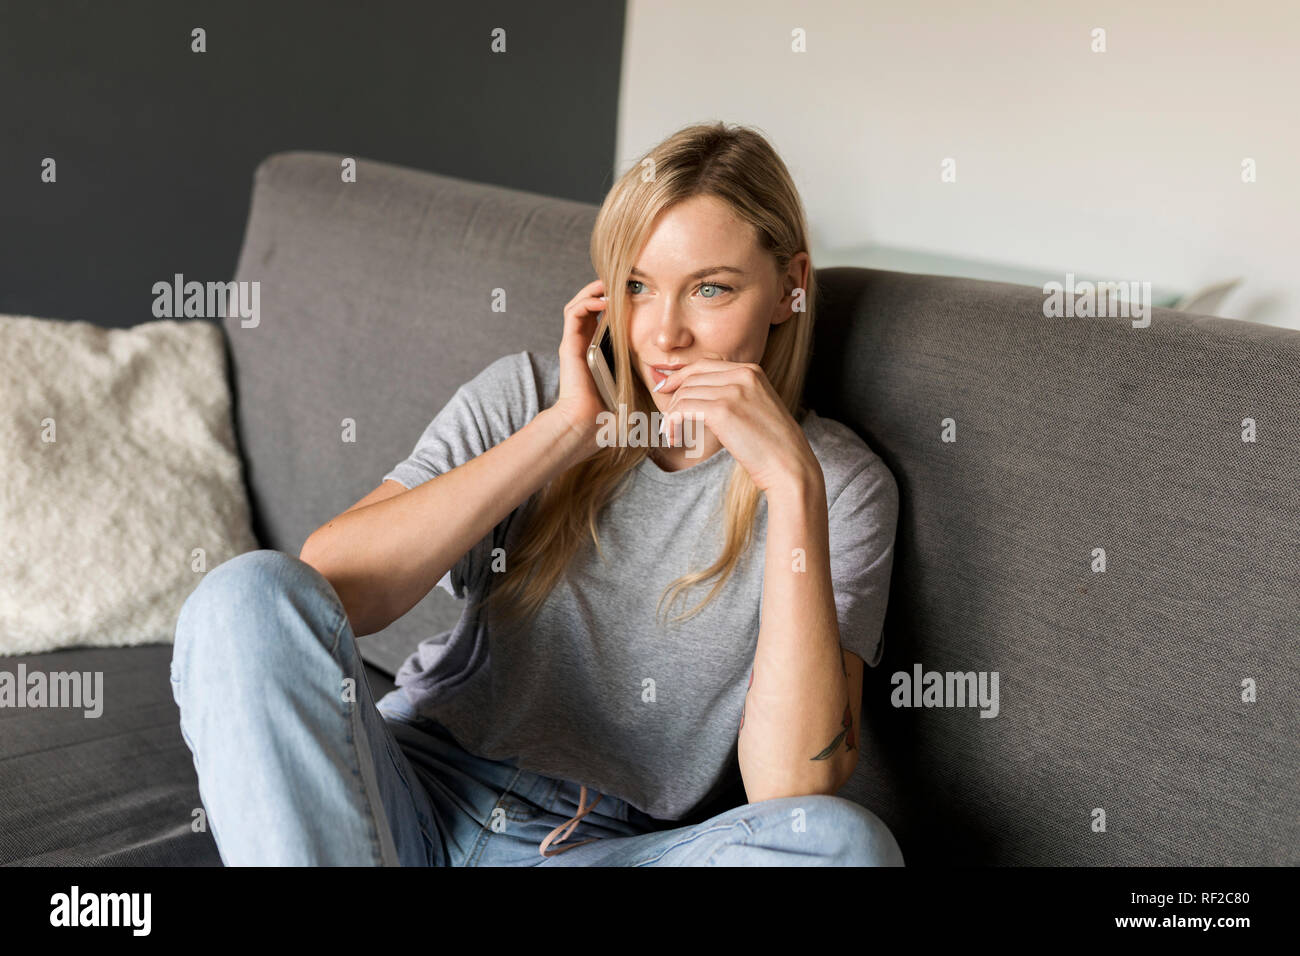 Smiling young woman sitting on couch talking on cell phone Stock Photo